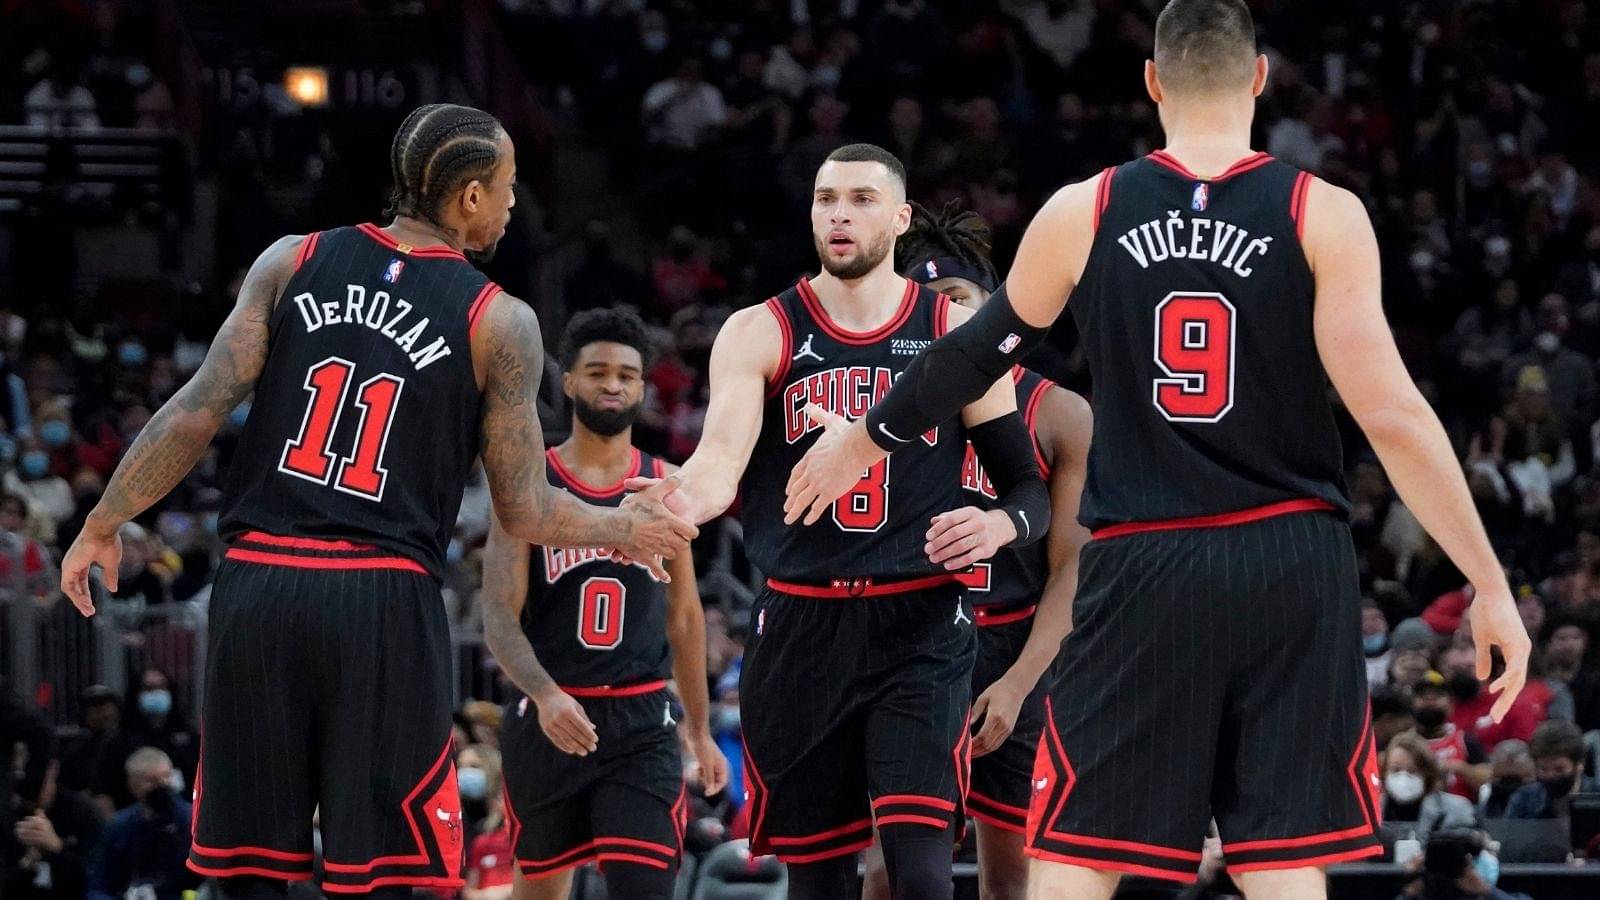 "DeMar Derozan is still at the top of his game....": Zach LaVine is all praises for the All-Star teammate for carrying the Bulls despite multiple stars out with injuries